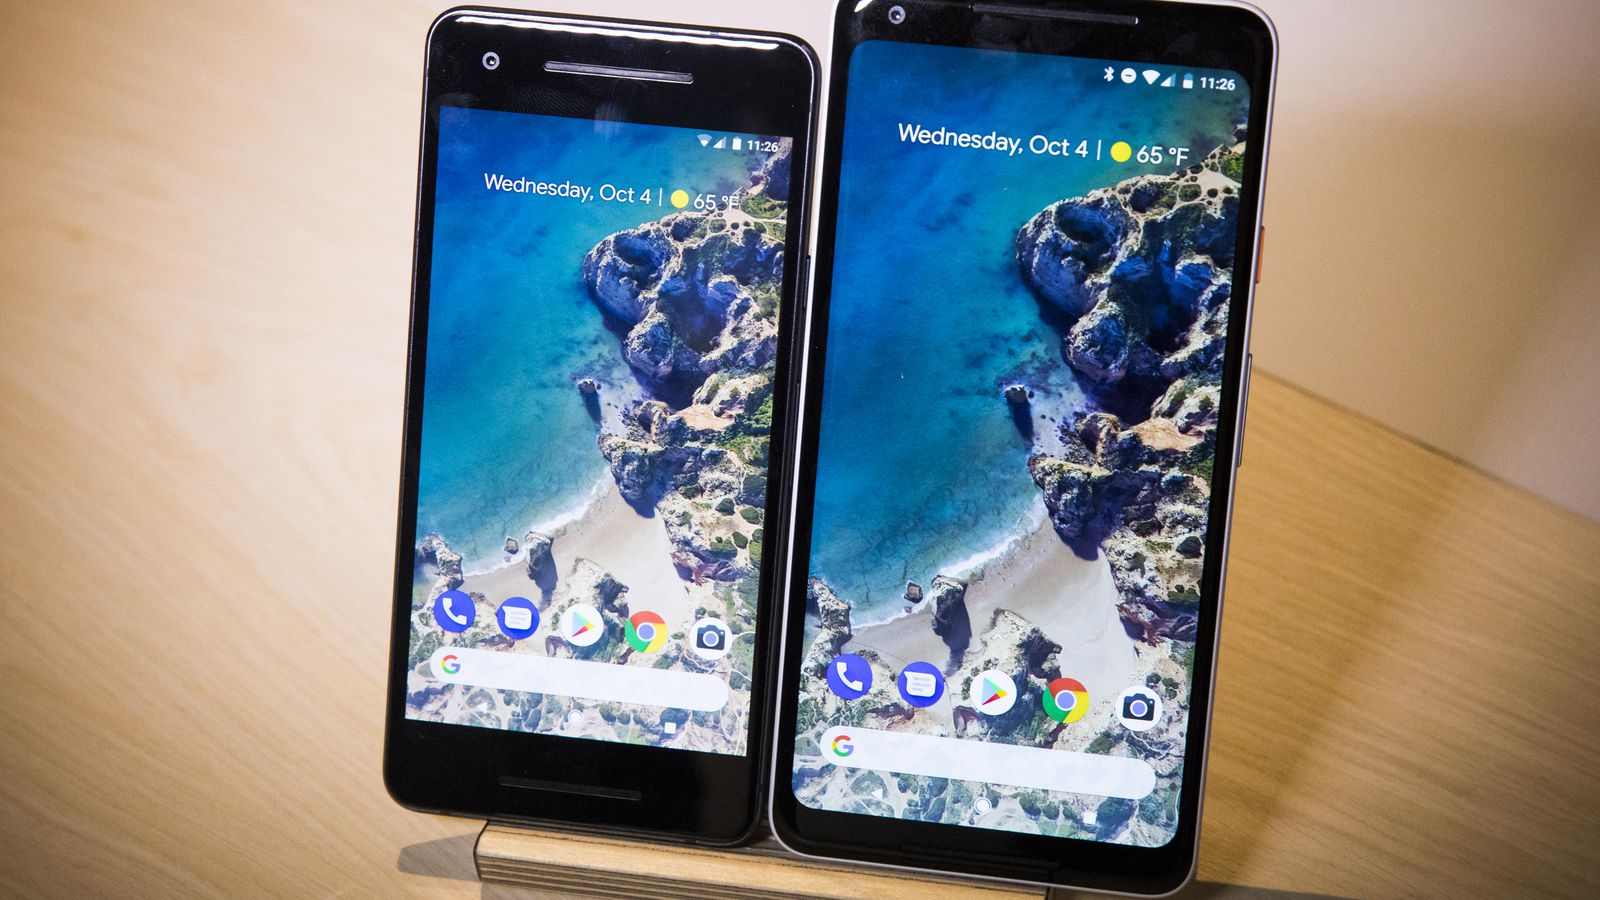 Download] Get the animated / Live wallpapers of the Google Pixel 2 (APK)